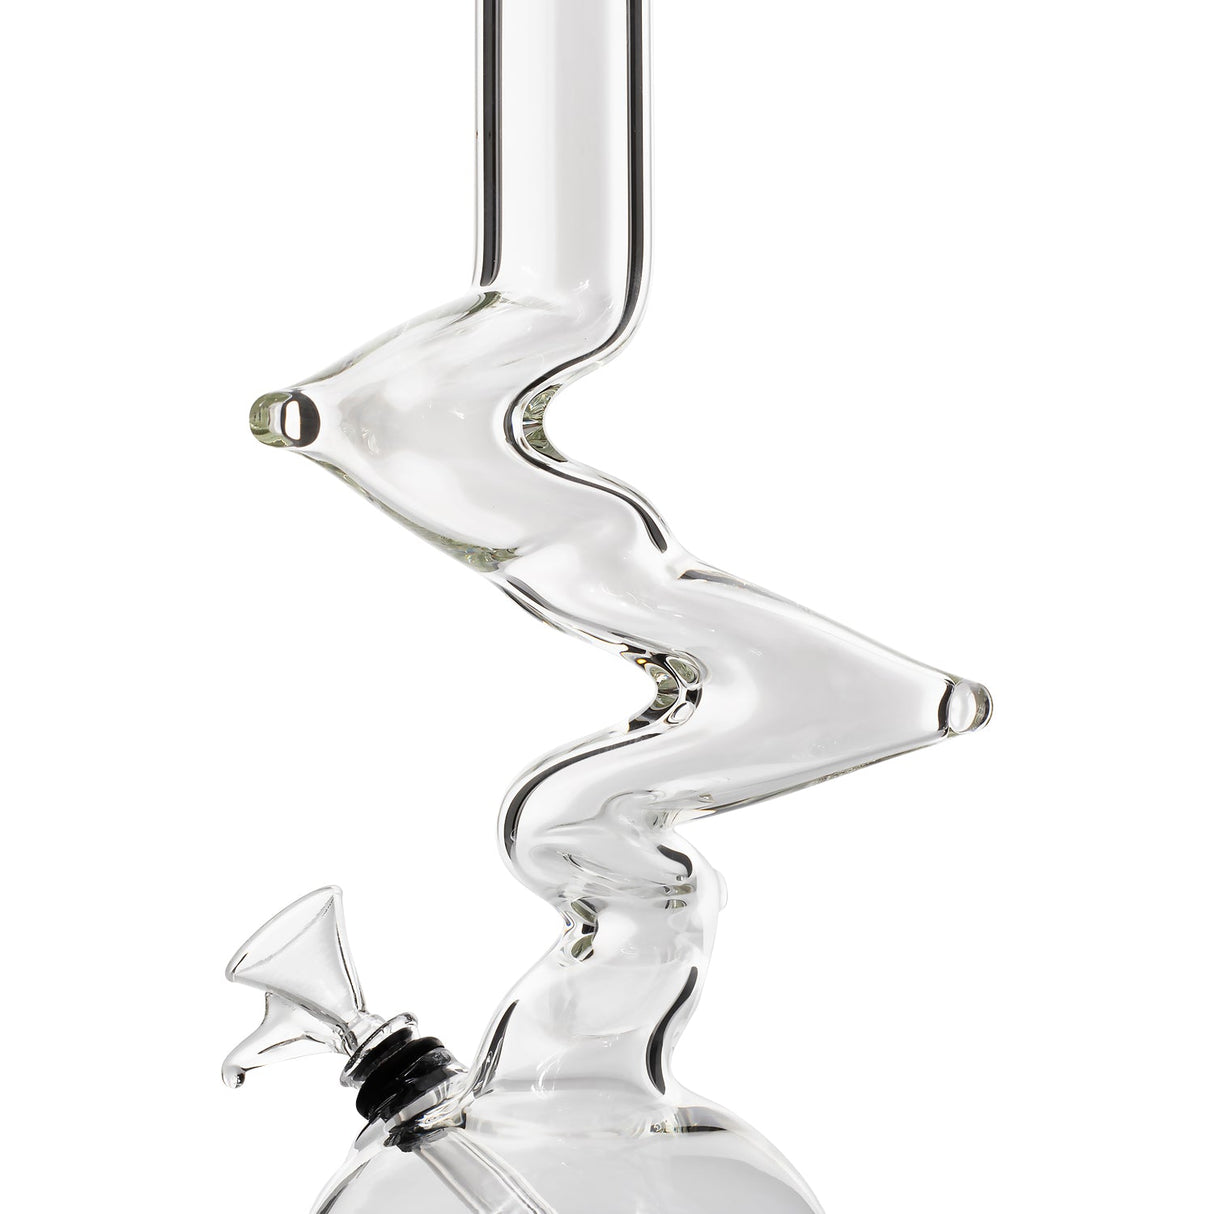 LA Pipes "Jacobs Ladder" Clear Zong Bong